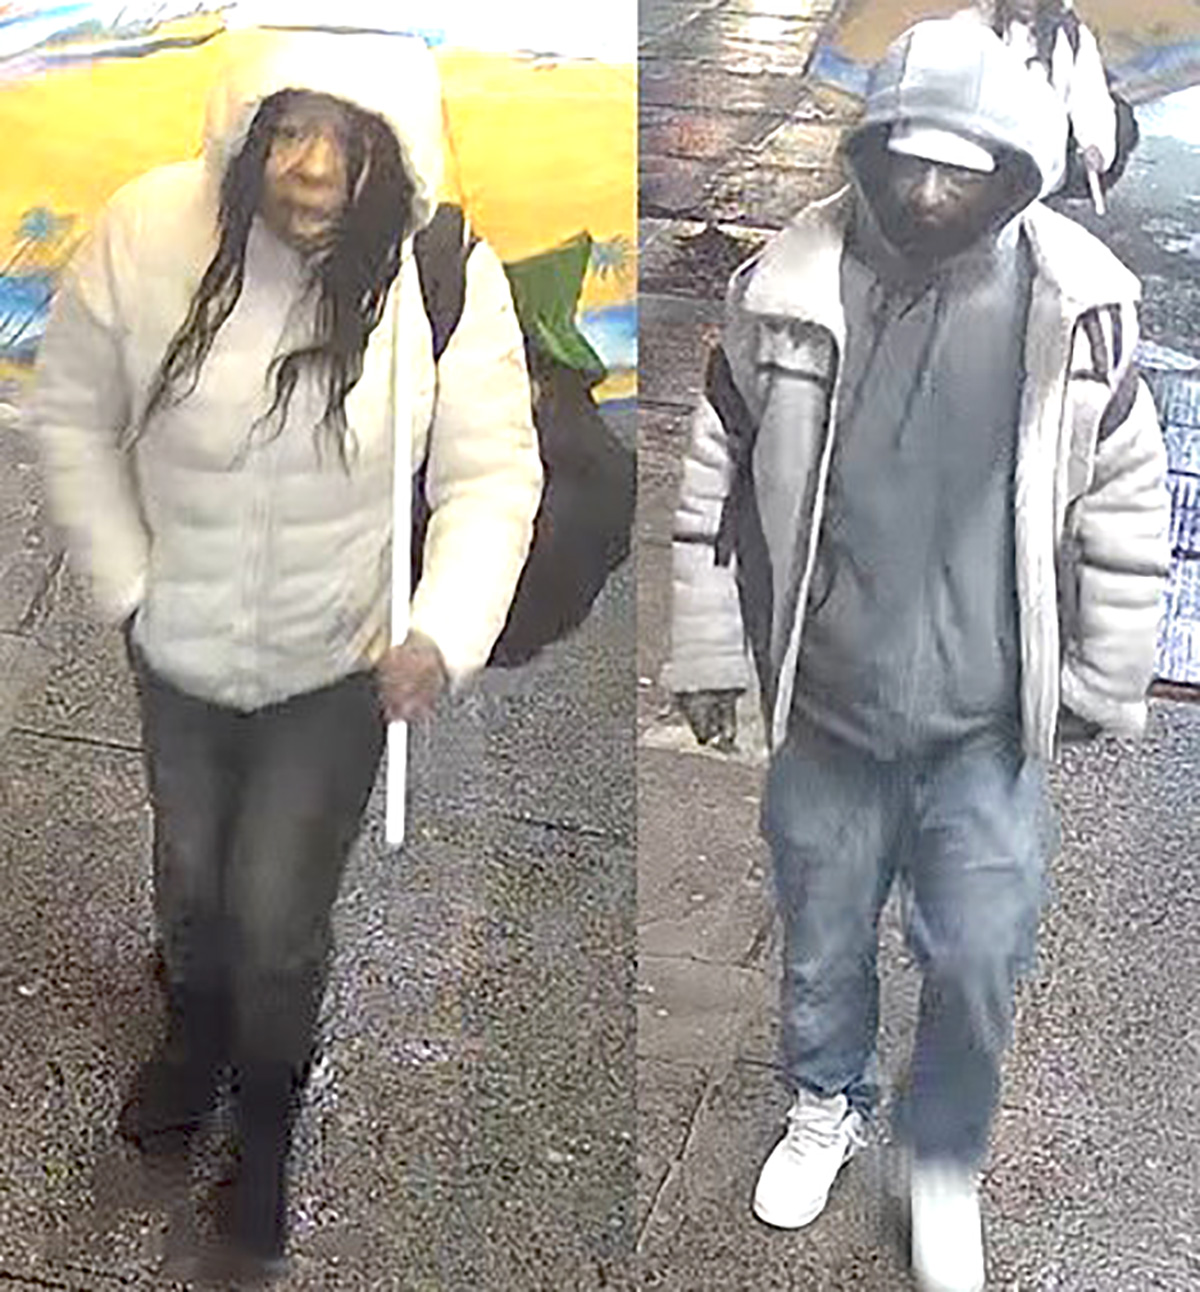 The NYPD is searching for a woman and a man in connection with an assault and robbery in Mott Haven. -Photo by NYPD